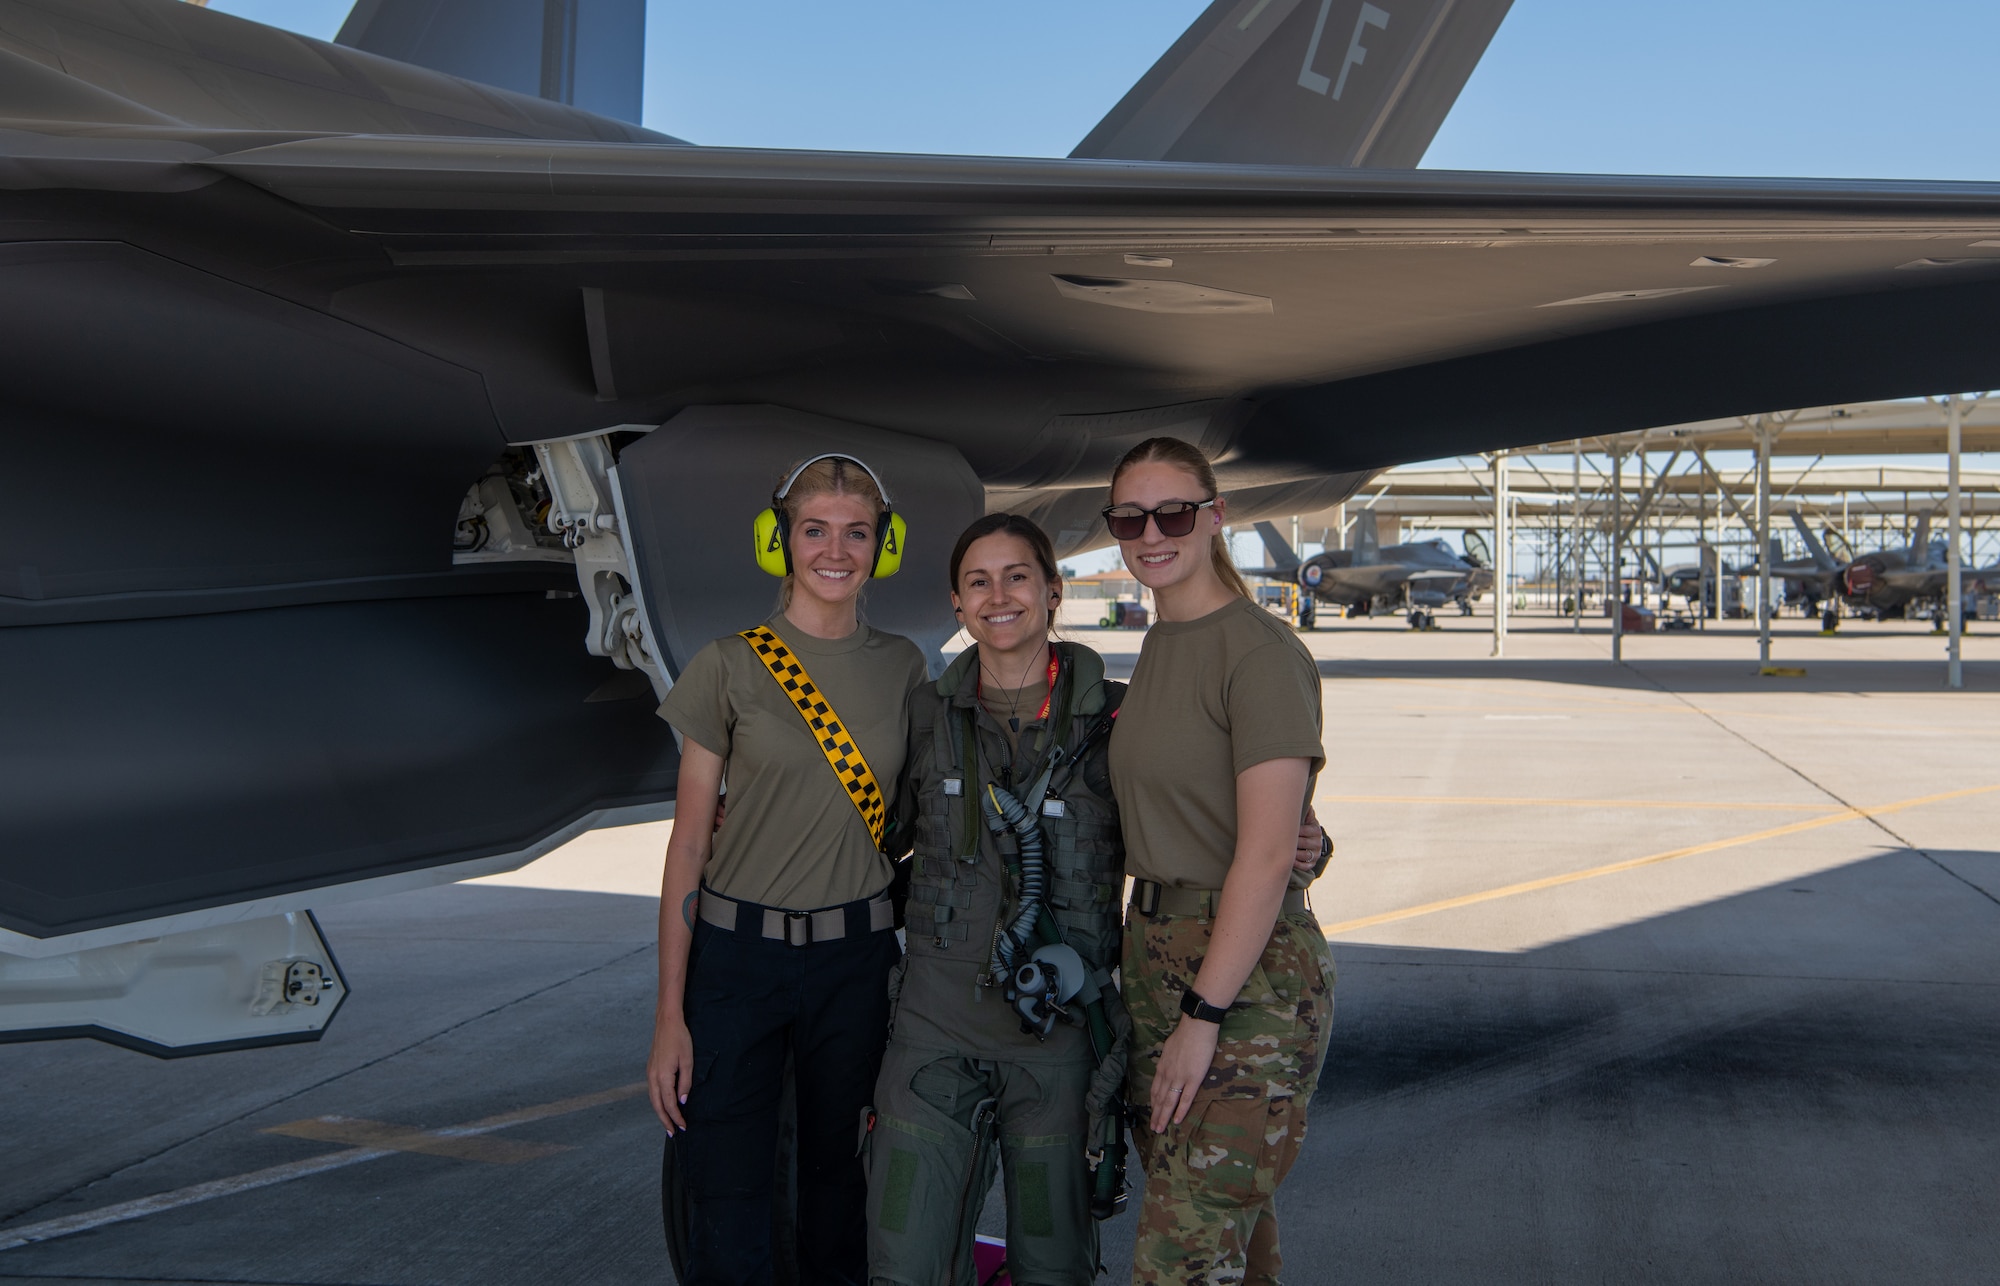 U.S. Air Force Staff Sgt. Paige Mitchell (left), 61st Fighter Squadron F-35 crew chief, U.S. Air Force Capt. Melanie Kluesner (middle), 62nd FS F-35 instructor pilot, and U.S. Air Force Airman Makenzie Milless, 62nd FS F-35 crew chief, pose for a photo at Luke Air Force Base, Arizona, Mar. 28, 2023.